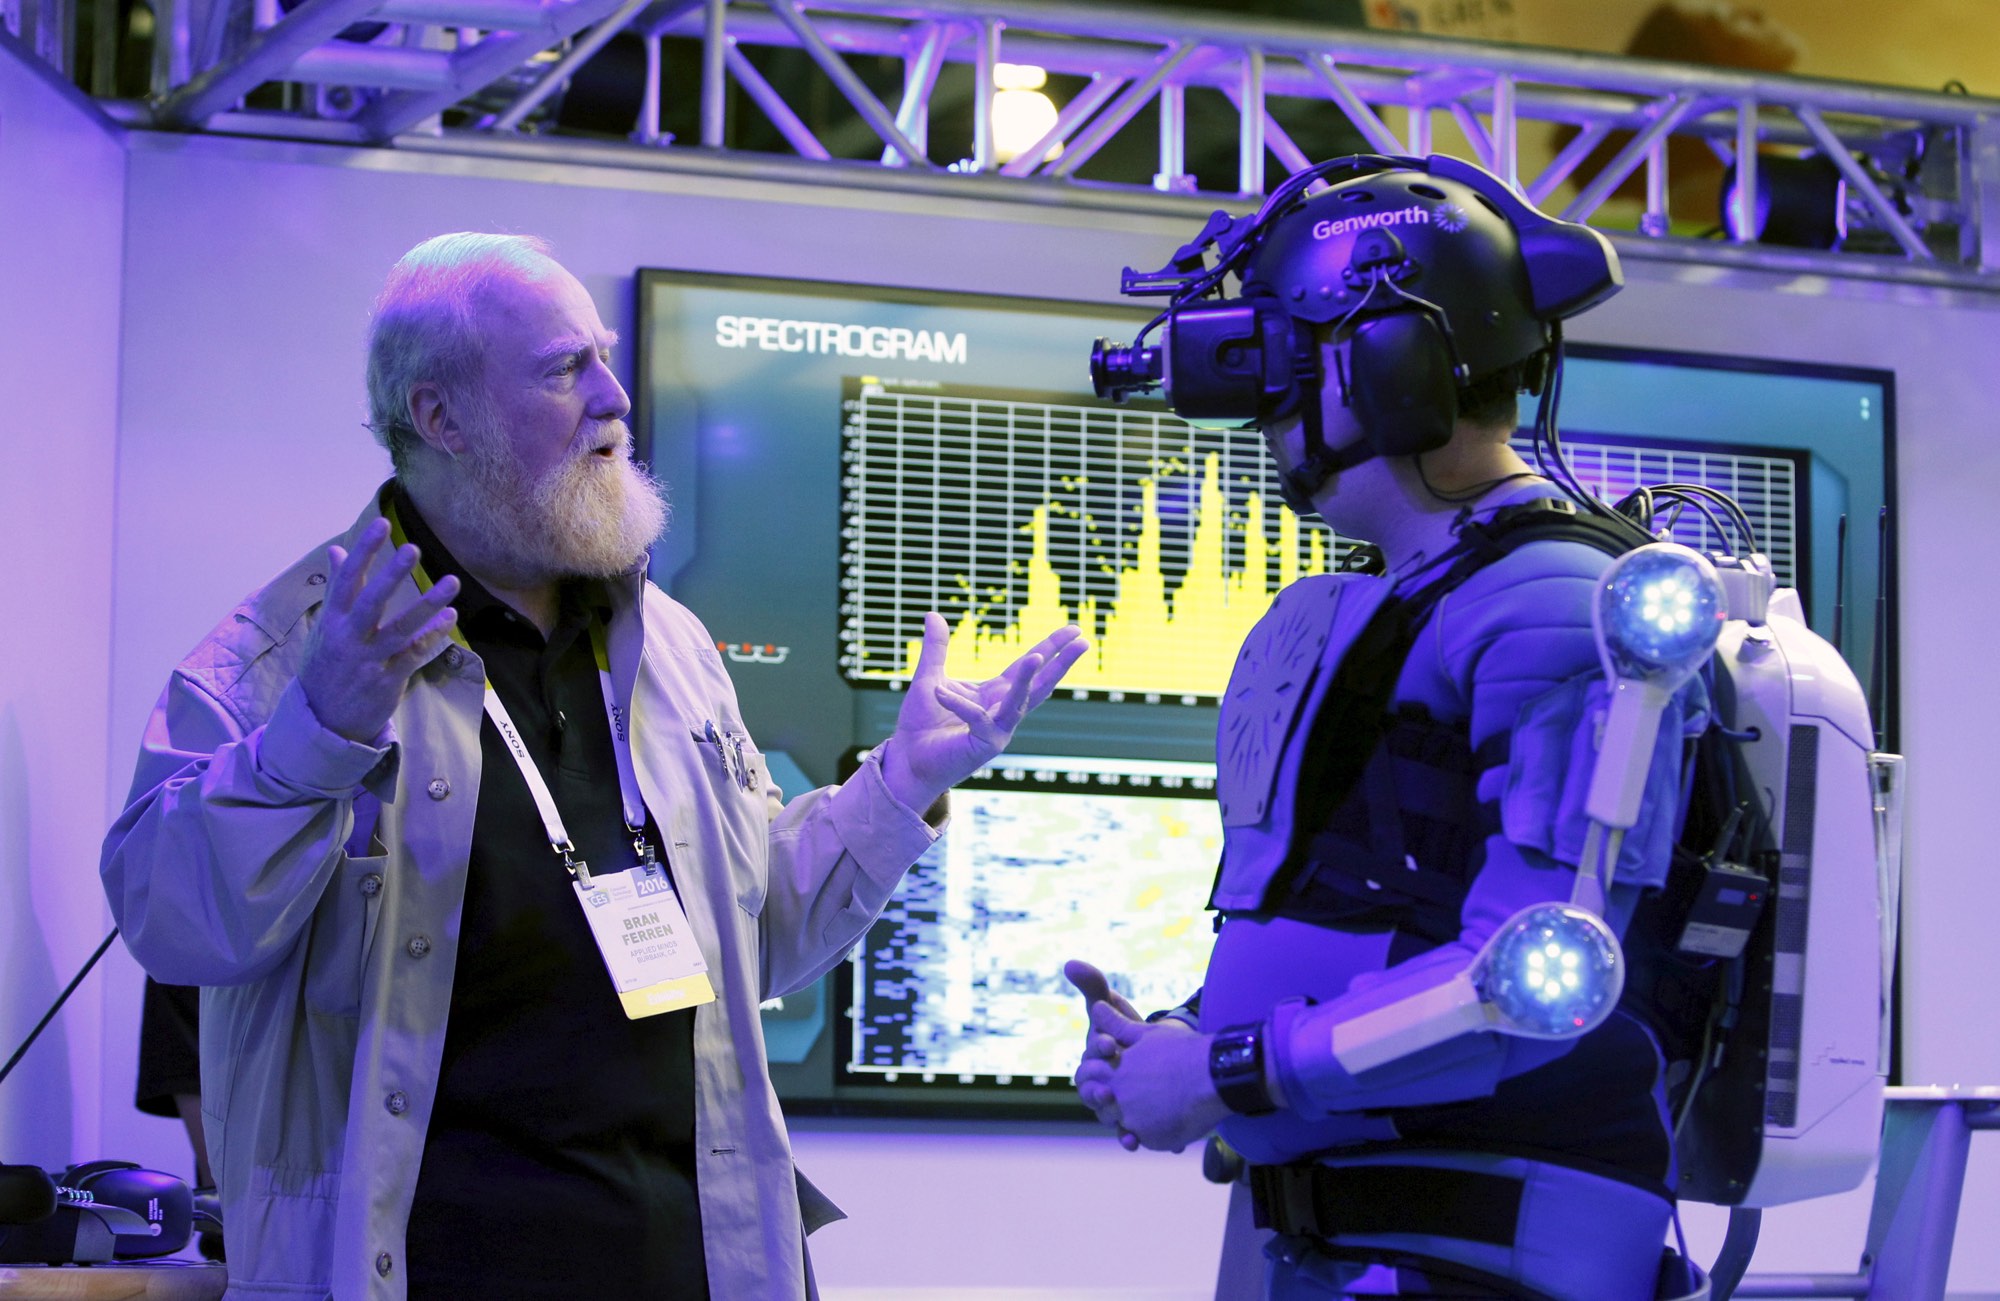 Bran Ferren (L), founder of Applied Minds, talks to a journalist dressed in an R70i aging suit. REUTERS